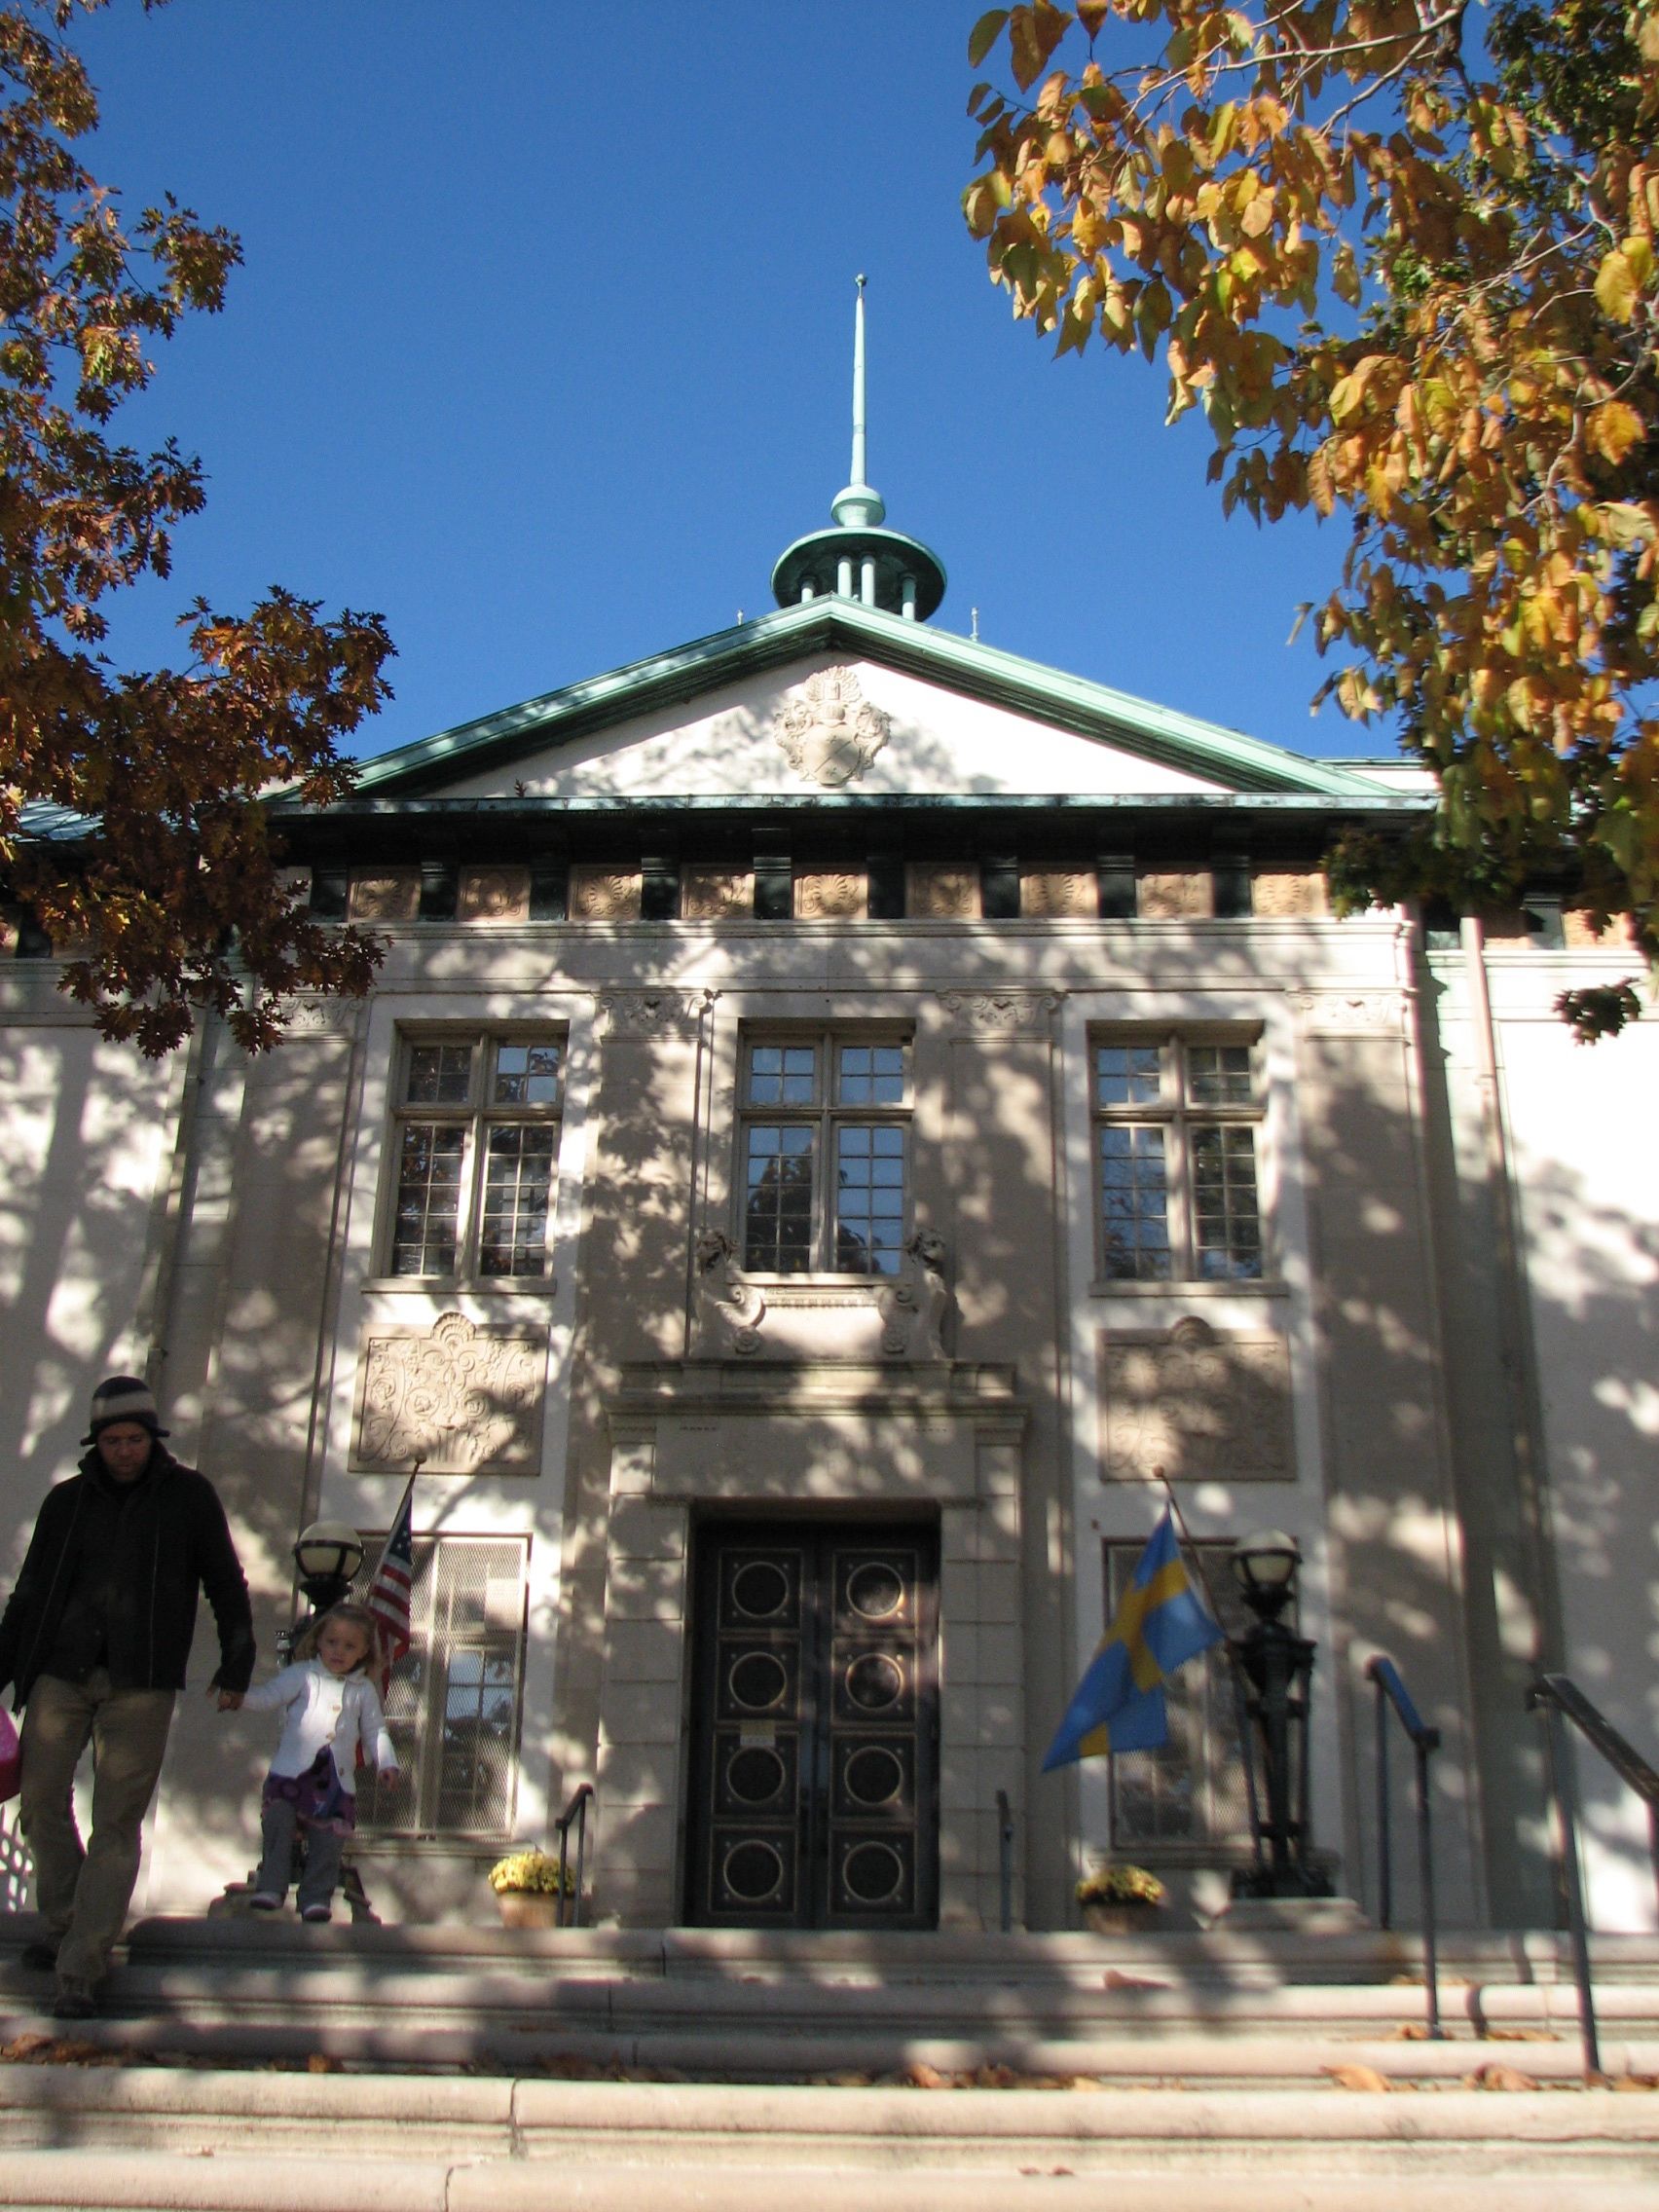 The American Swedish Historical Museum was built as part of the Sesquicentennial Exposition.